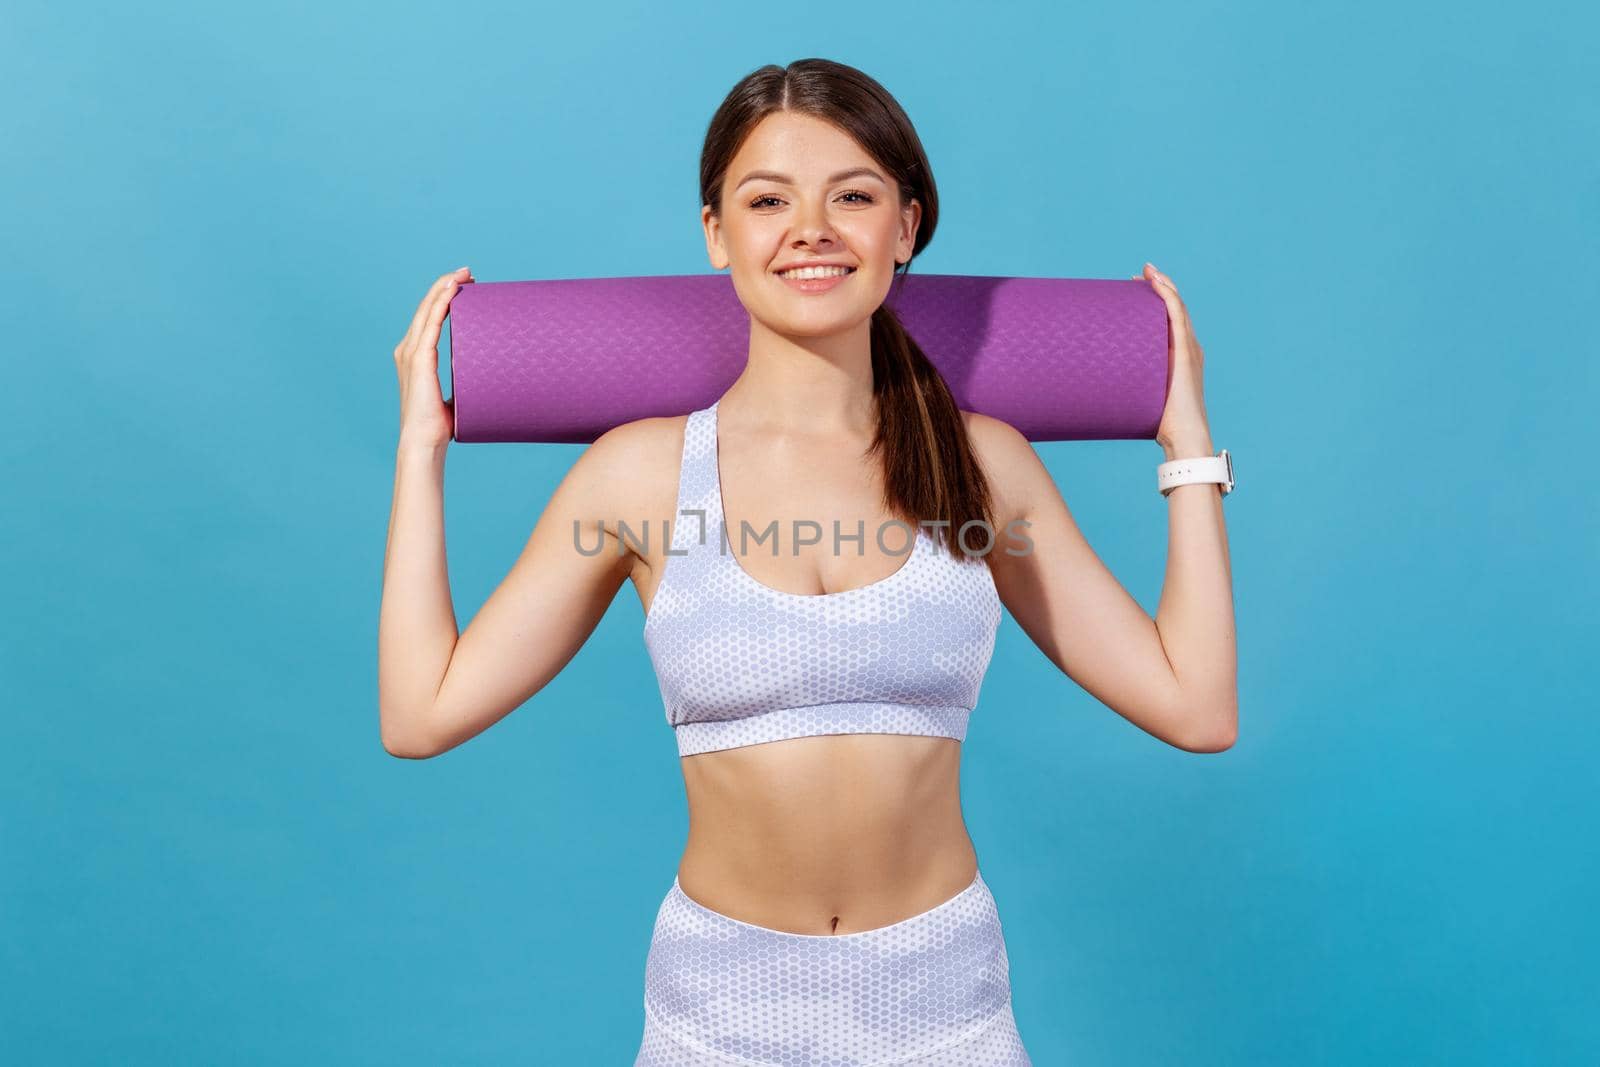 Healthy athletic woman in white sportswear holding rolled mat on shoulders looking at camera with smile, preparing for fitness, pilates or yoga classes. Indoor studio shot isolated on blue background